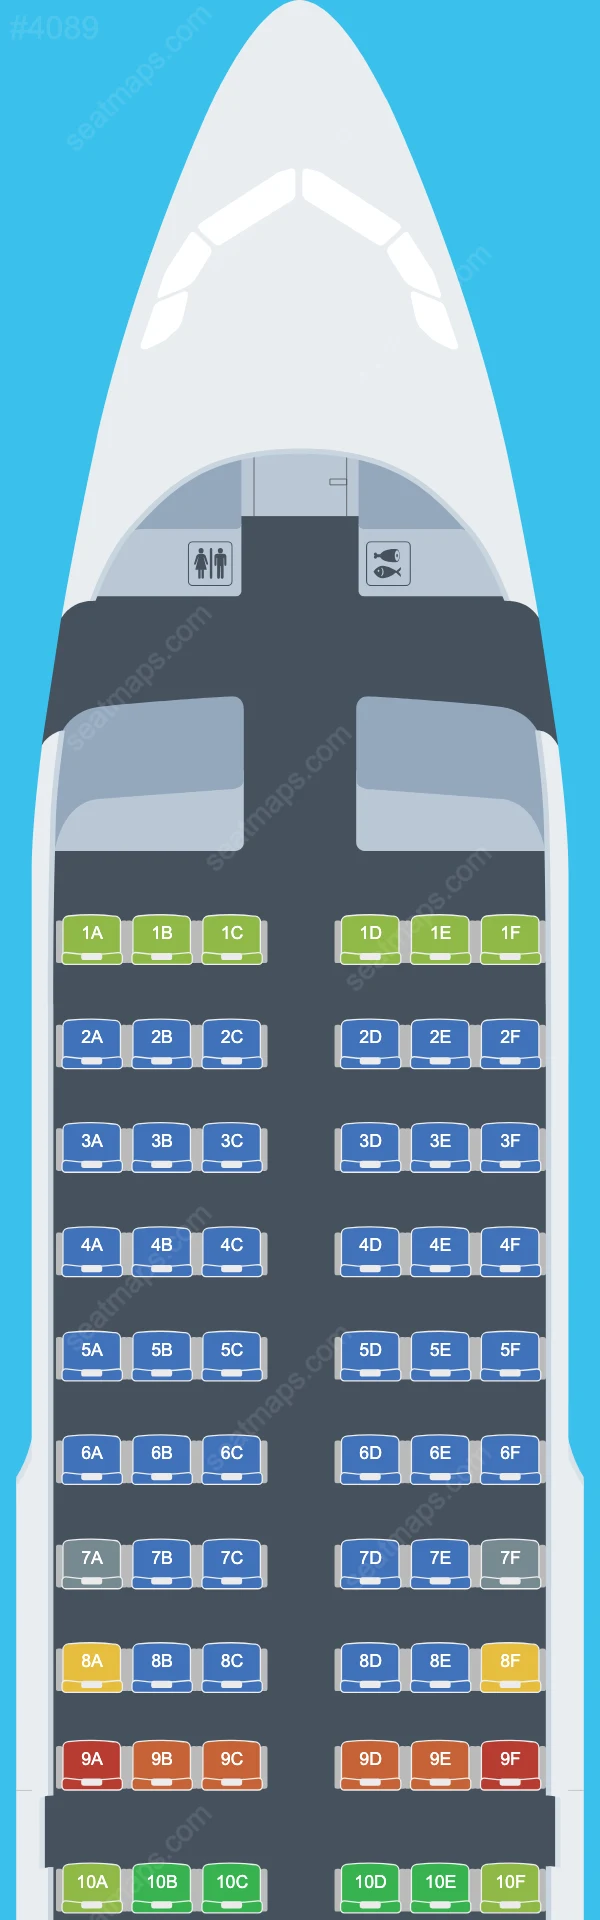 Croatia Airlines Airbus A319 Seat Maps A319-100